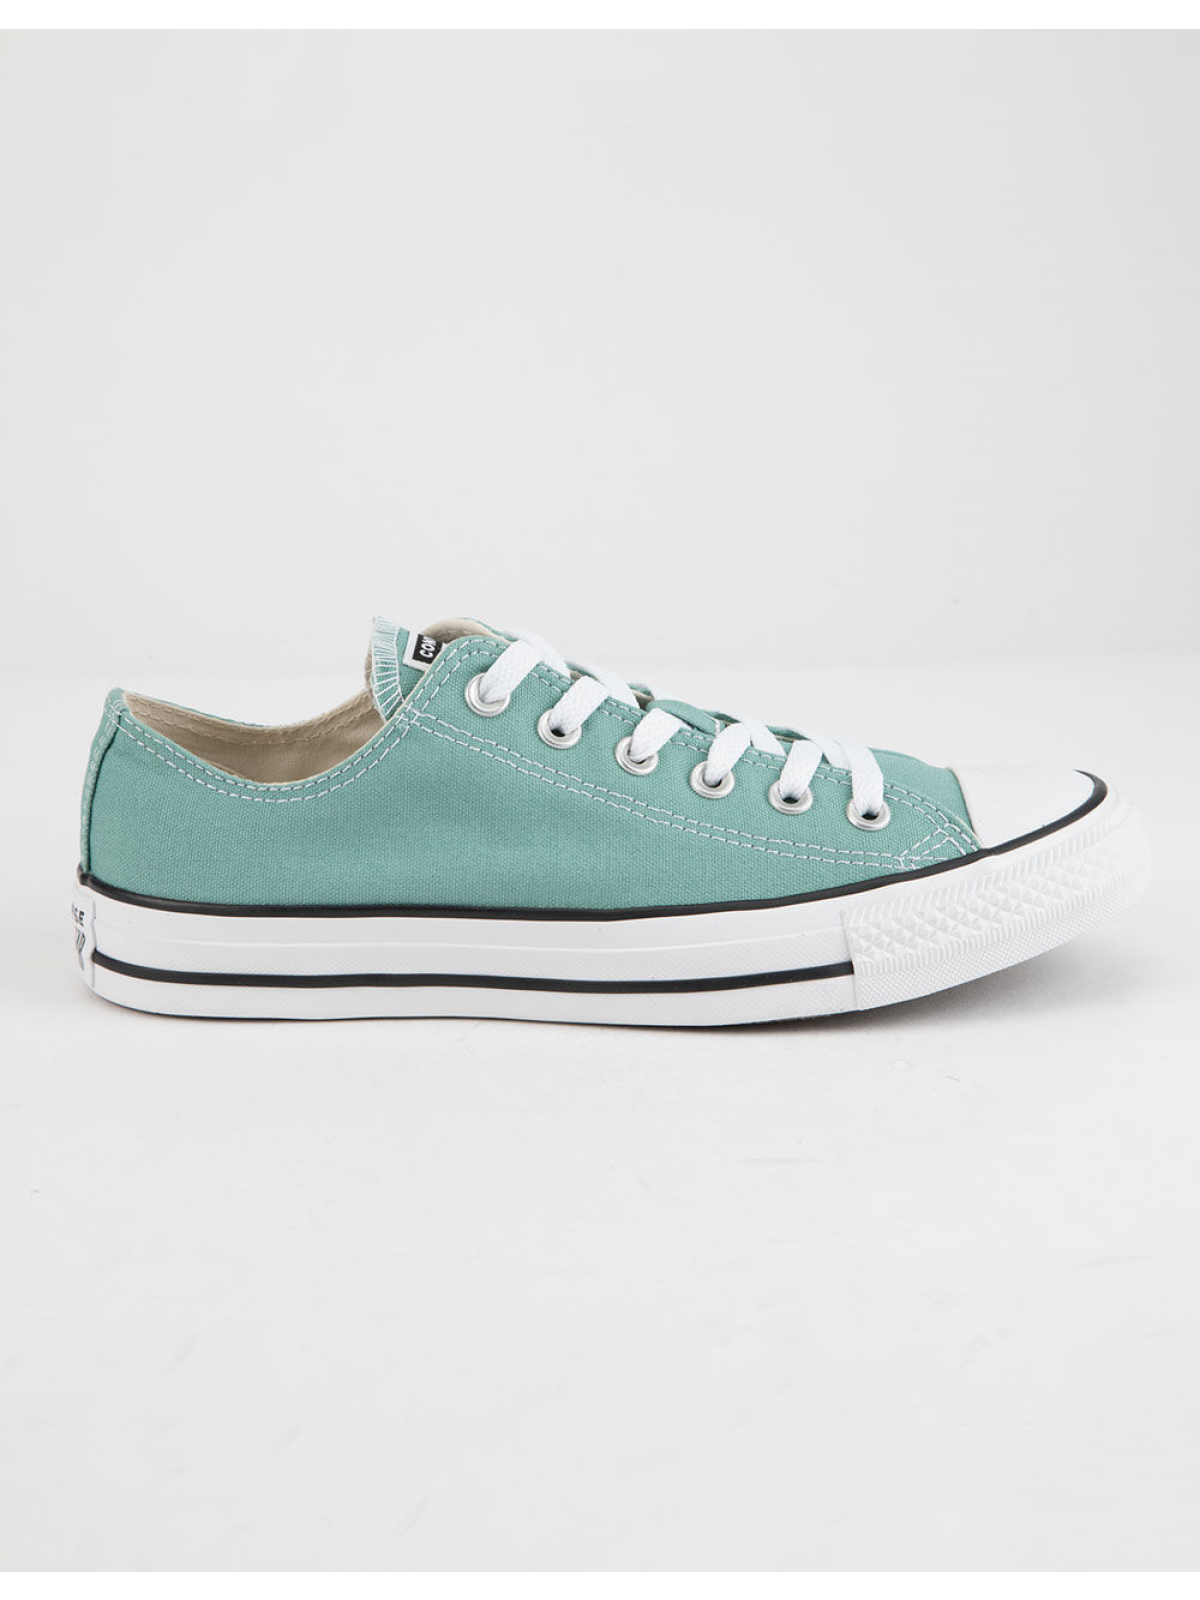 Converse Chuck all star toile basse mineral teal - Marques